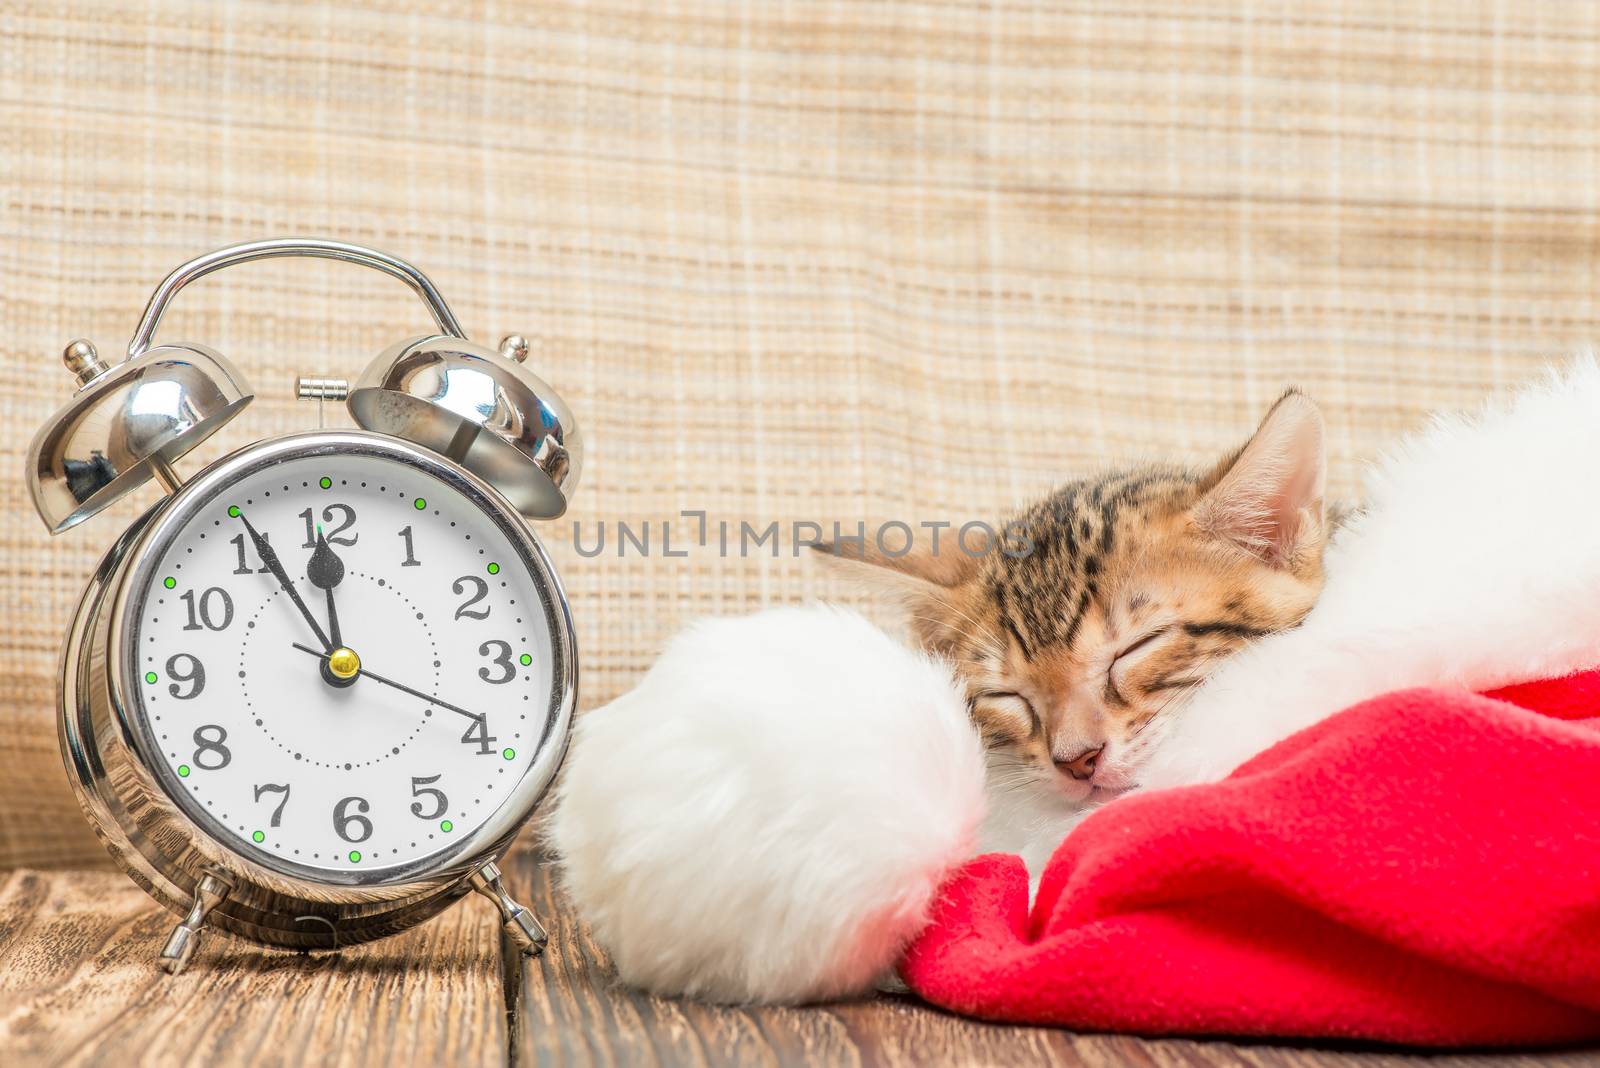 little kitty is sleeping soundly in Santa hat next to the retro by kosmsos111